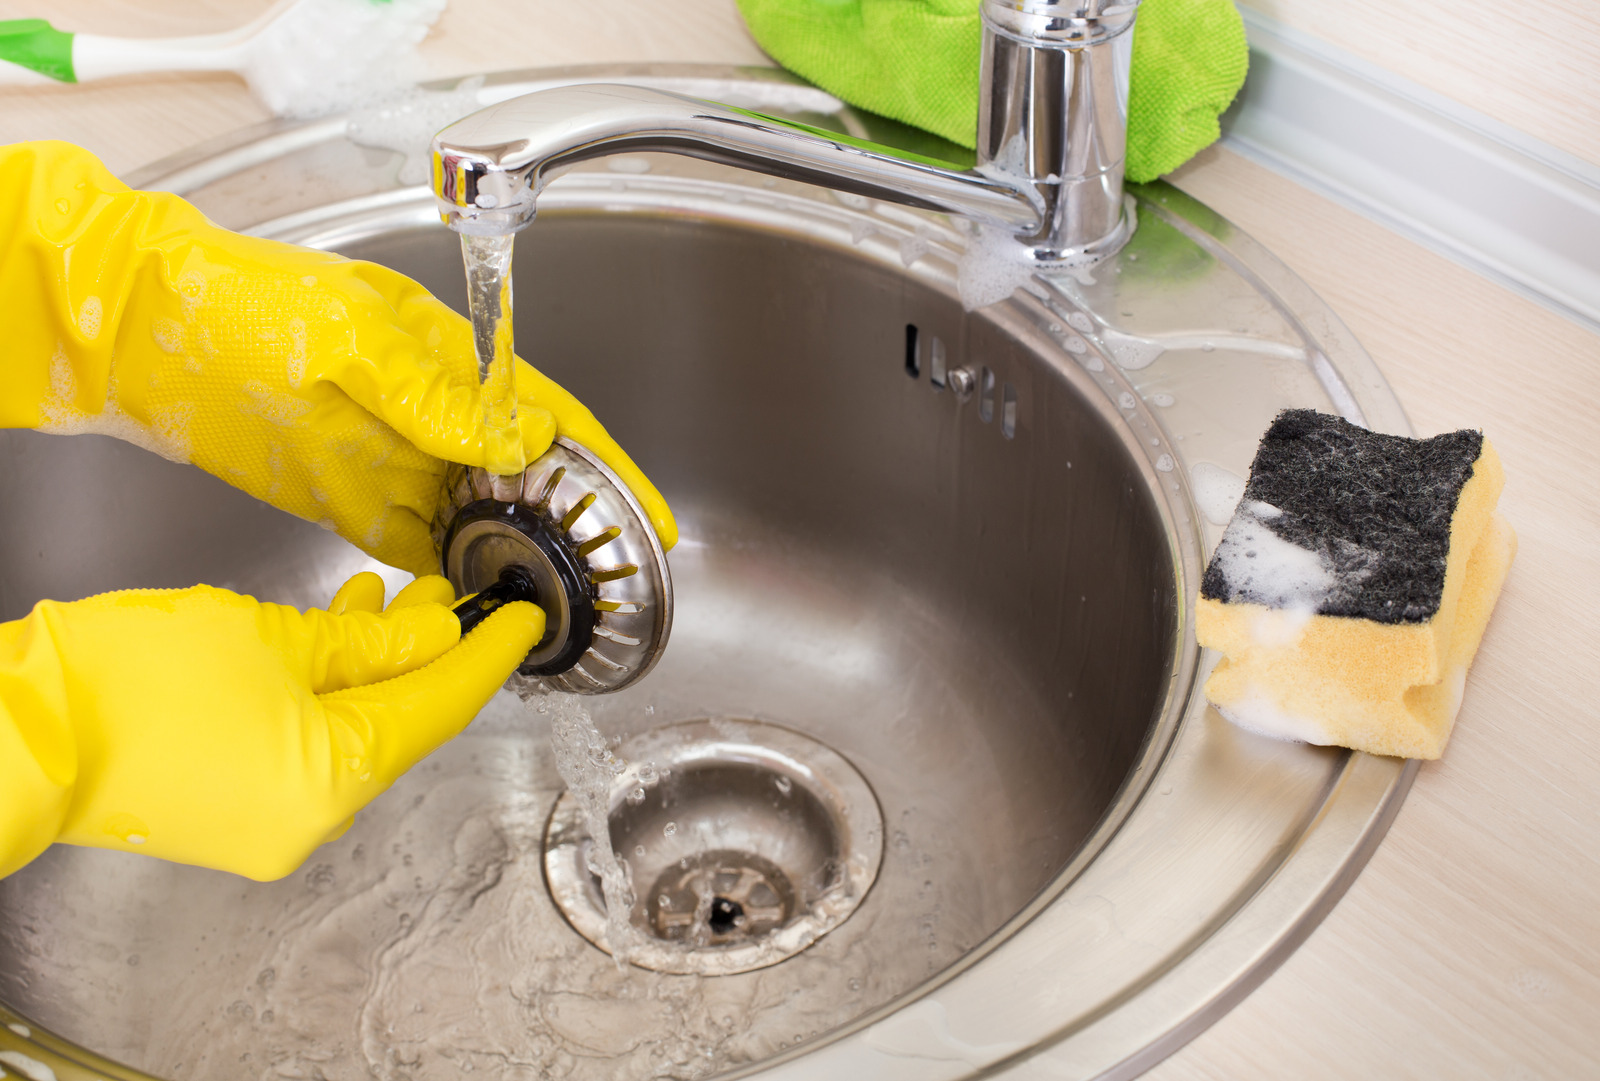 A2B Plumbing technician in Burnaby, BC, uses a drain snake to clear a clogged kitchen sink drain.